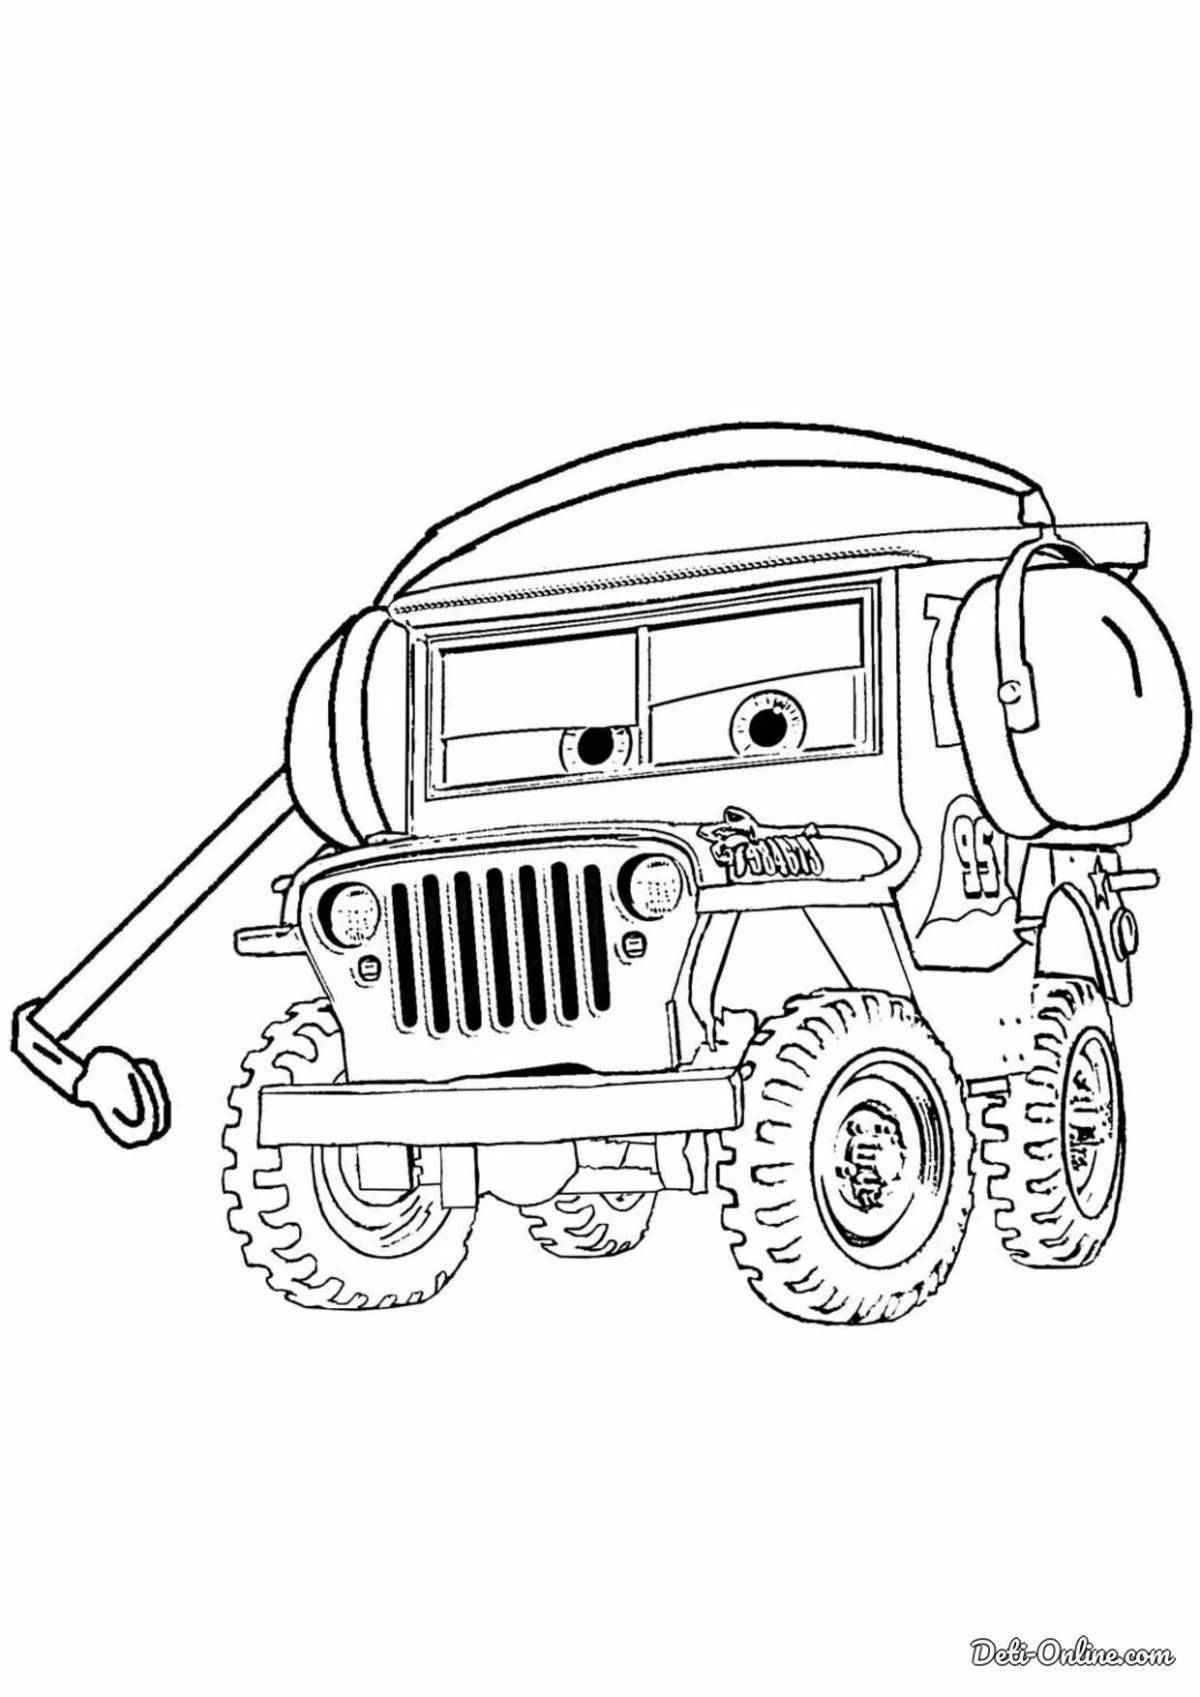 Frank's charming cars coloring page